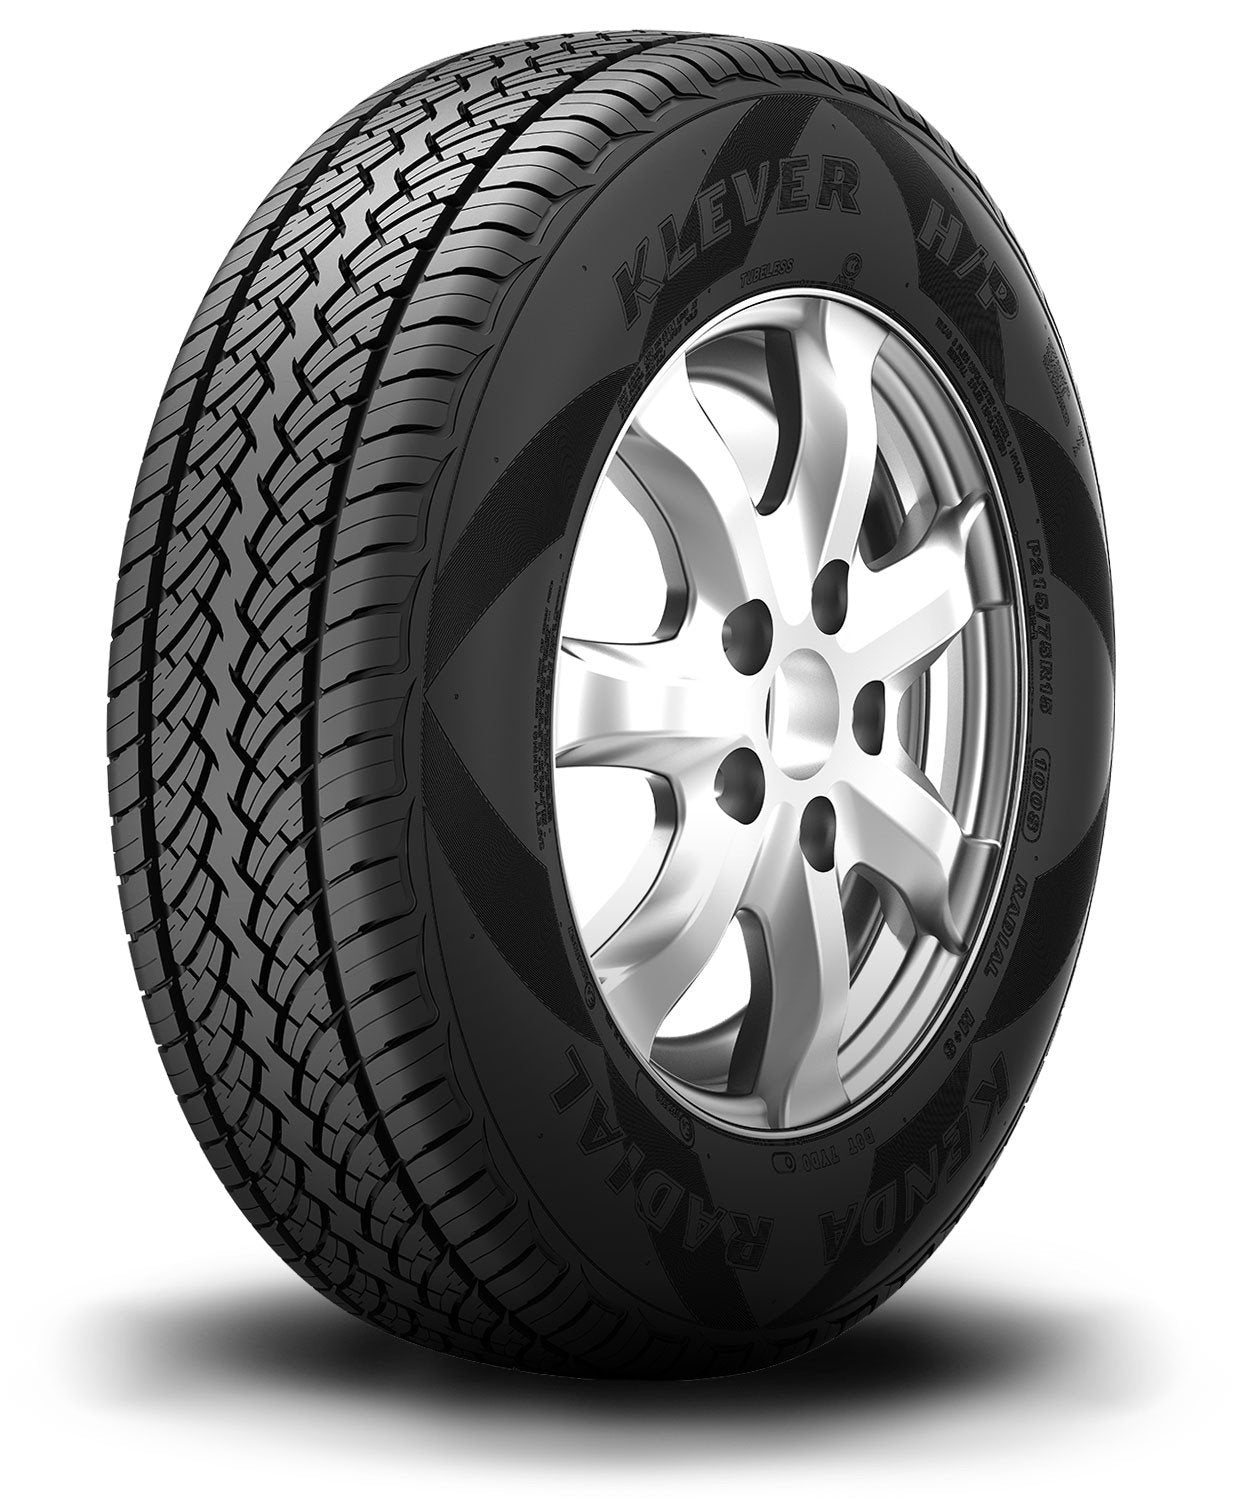 NEW 245/70R16 Kenda KLEVER HP KR15 107S BK - Tires and Engine Performance